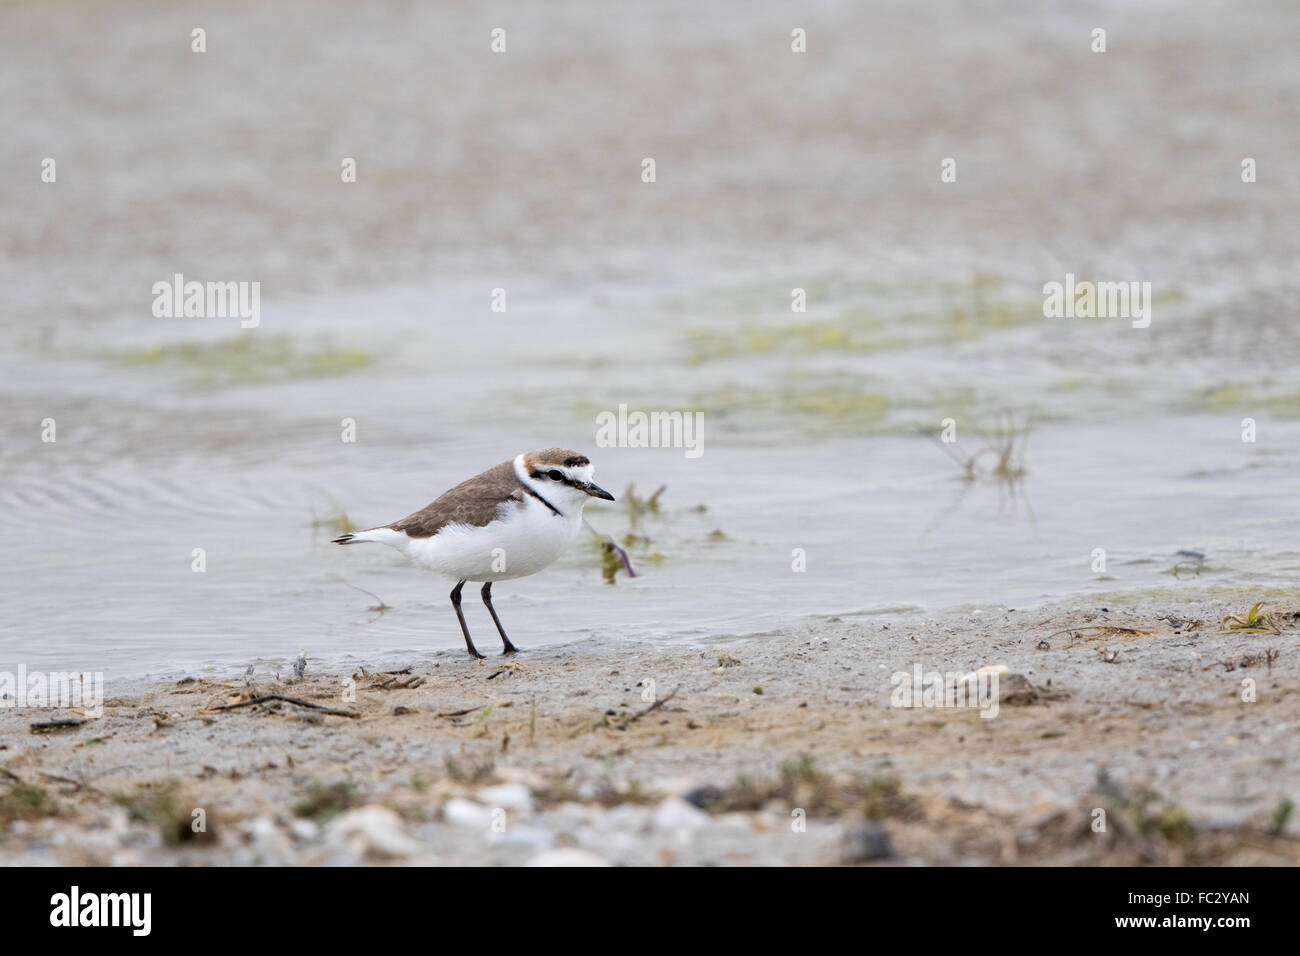 Western snowy plover Stock Photo